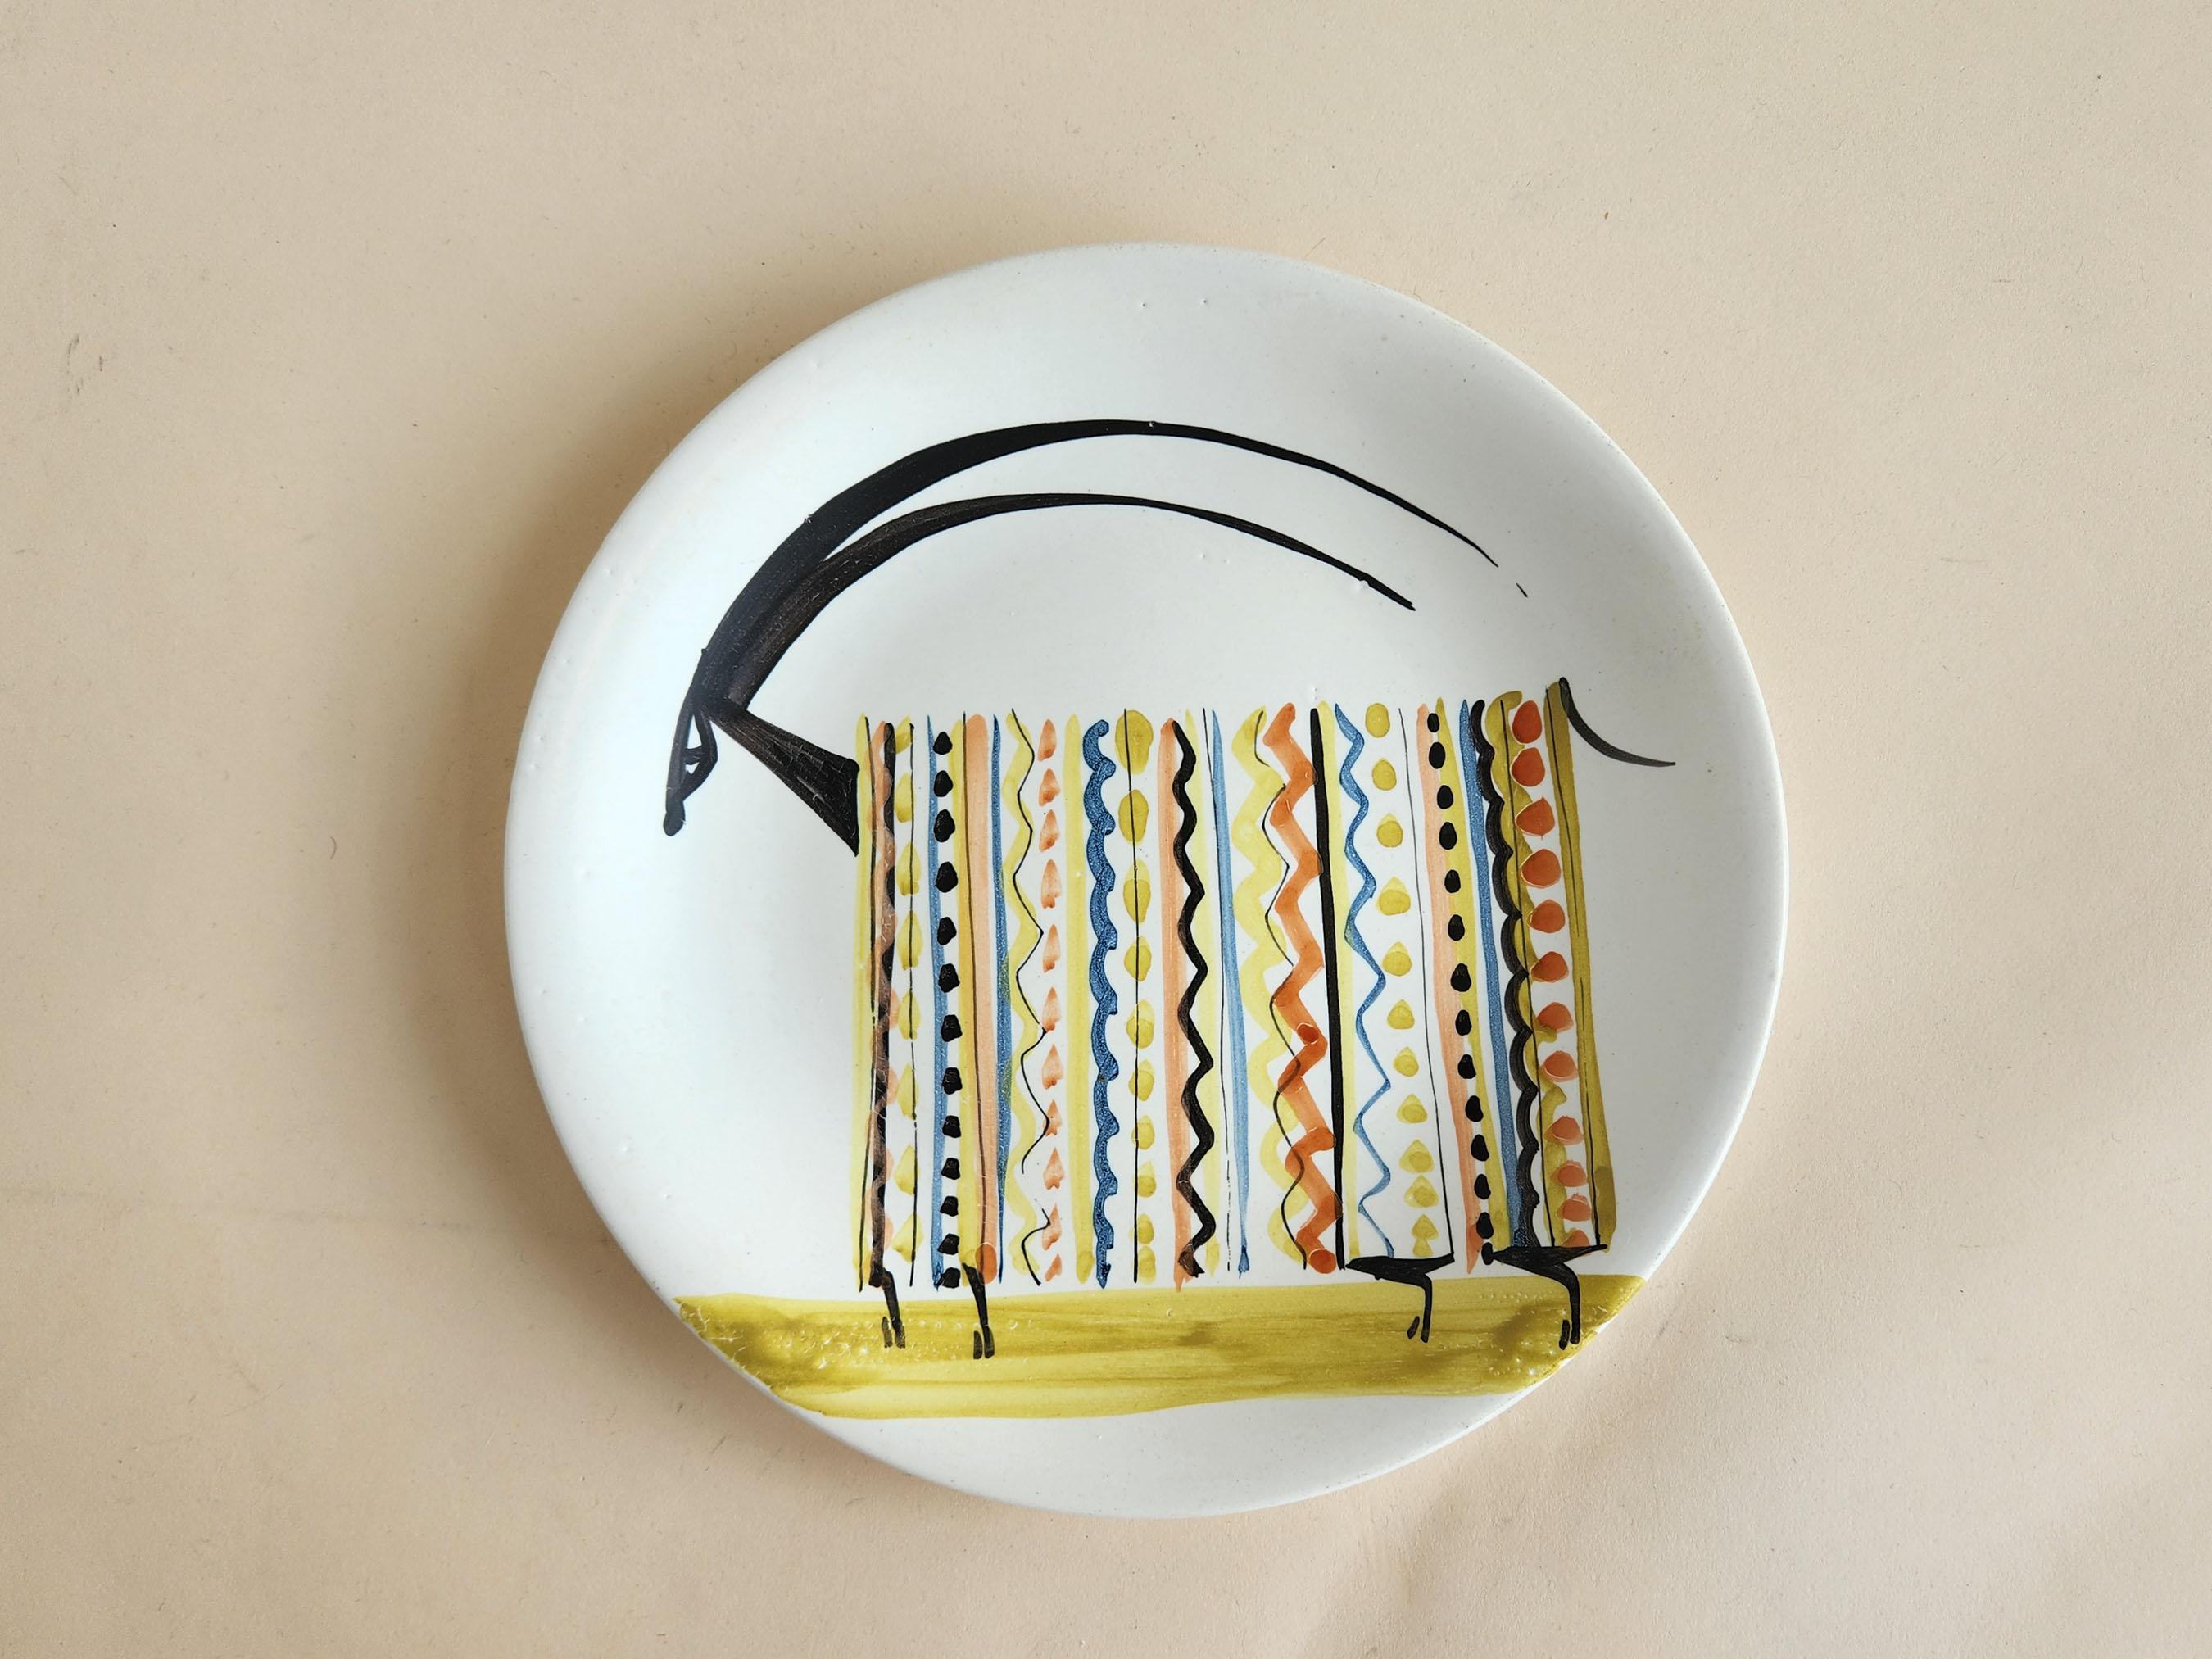 Vintage Ceramic Plate with Ram by Roger Capron - Vallauris, France

Roger Capron was in influential French ceramicist, known for his tiled tables and his use of recurring motifs such as stylized branches and geometrical suns.   He was born in